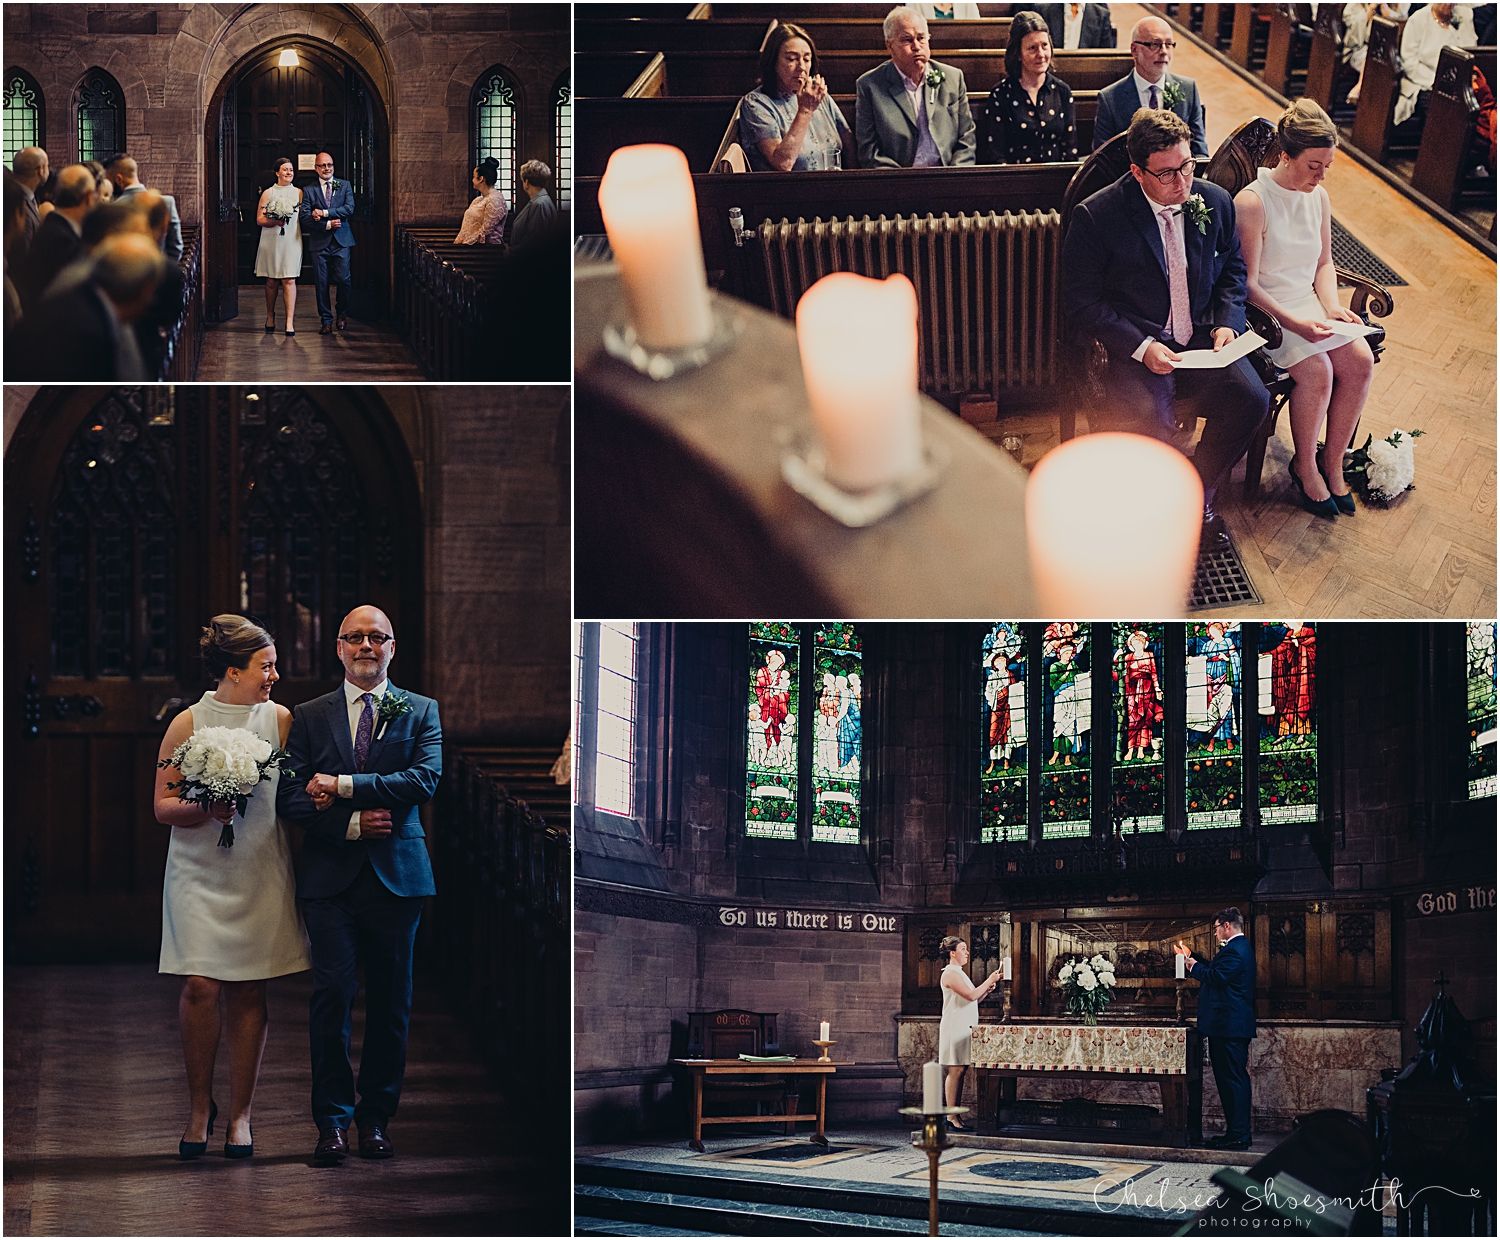 (104 of 395)Rosie & Mike, The Pen Factory - Chelsea Shoesmith Photography_